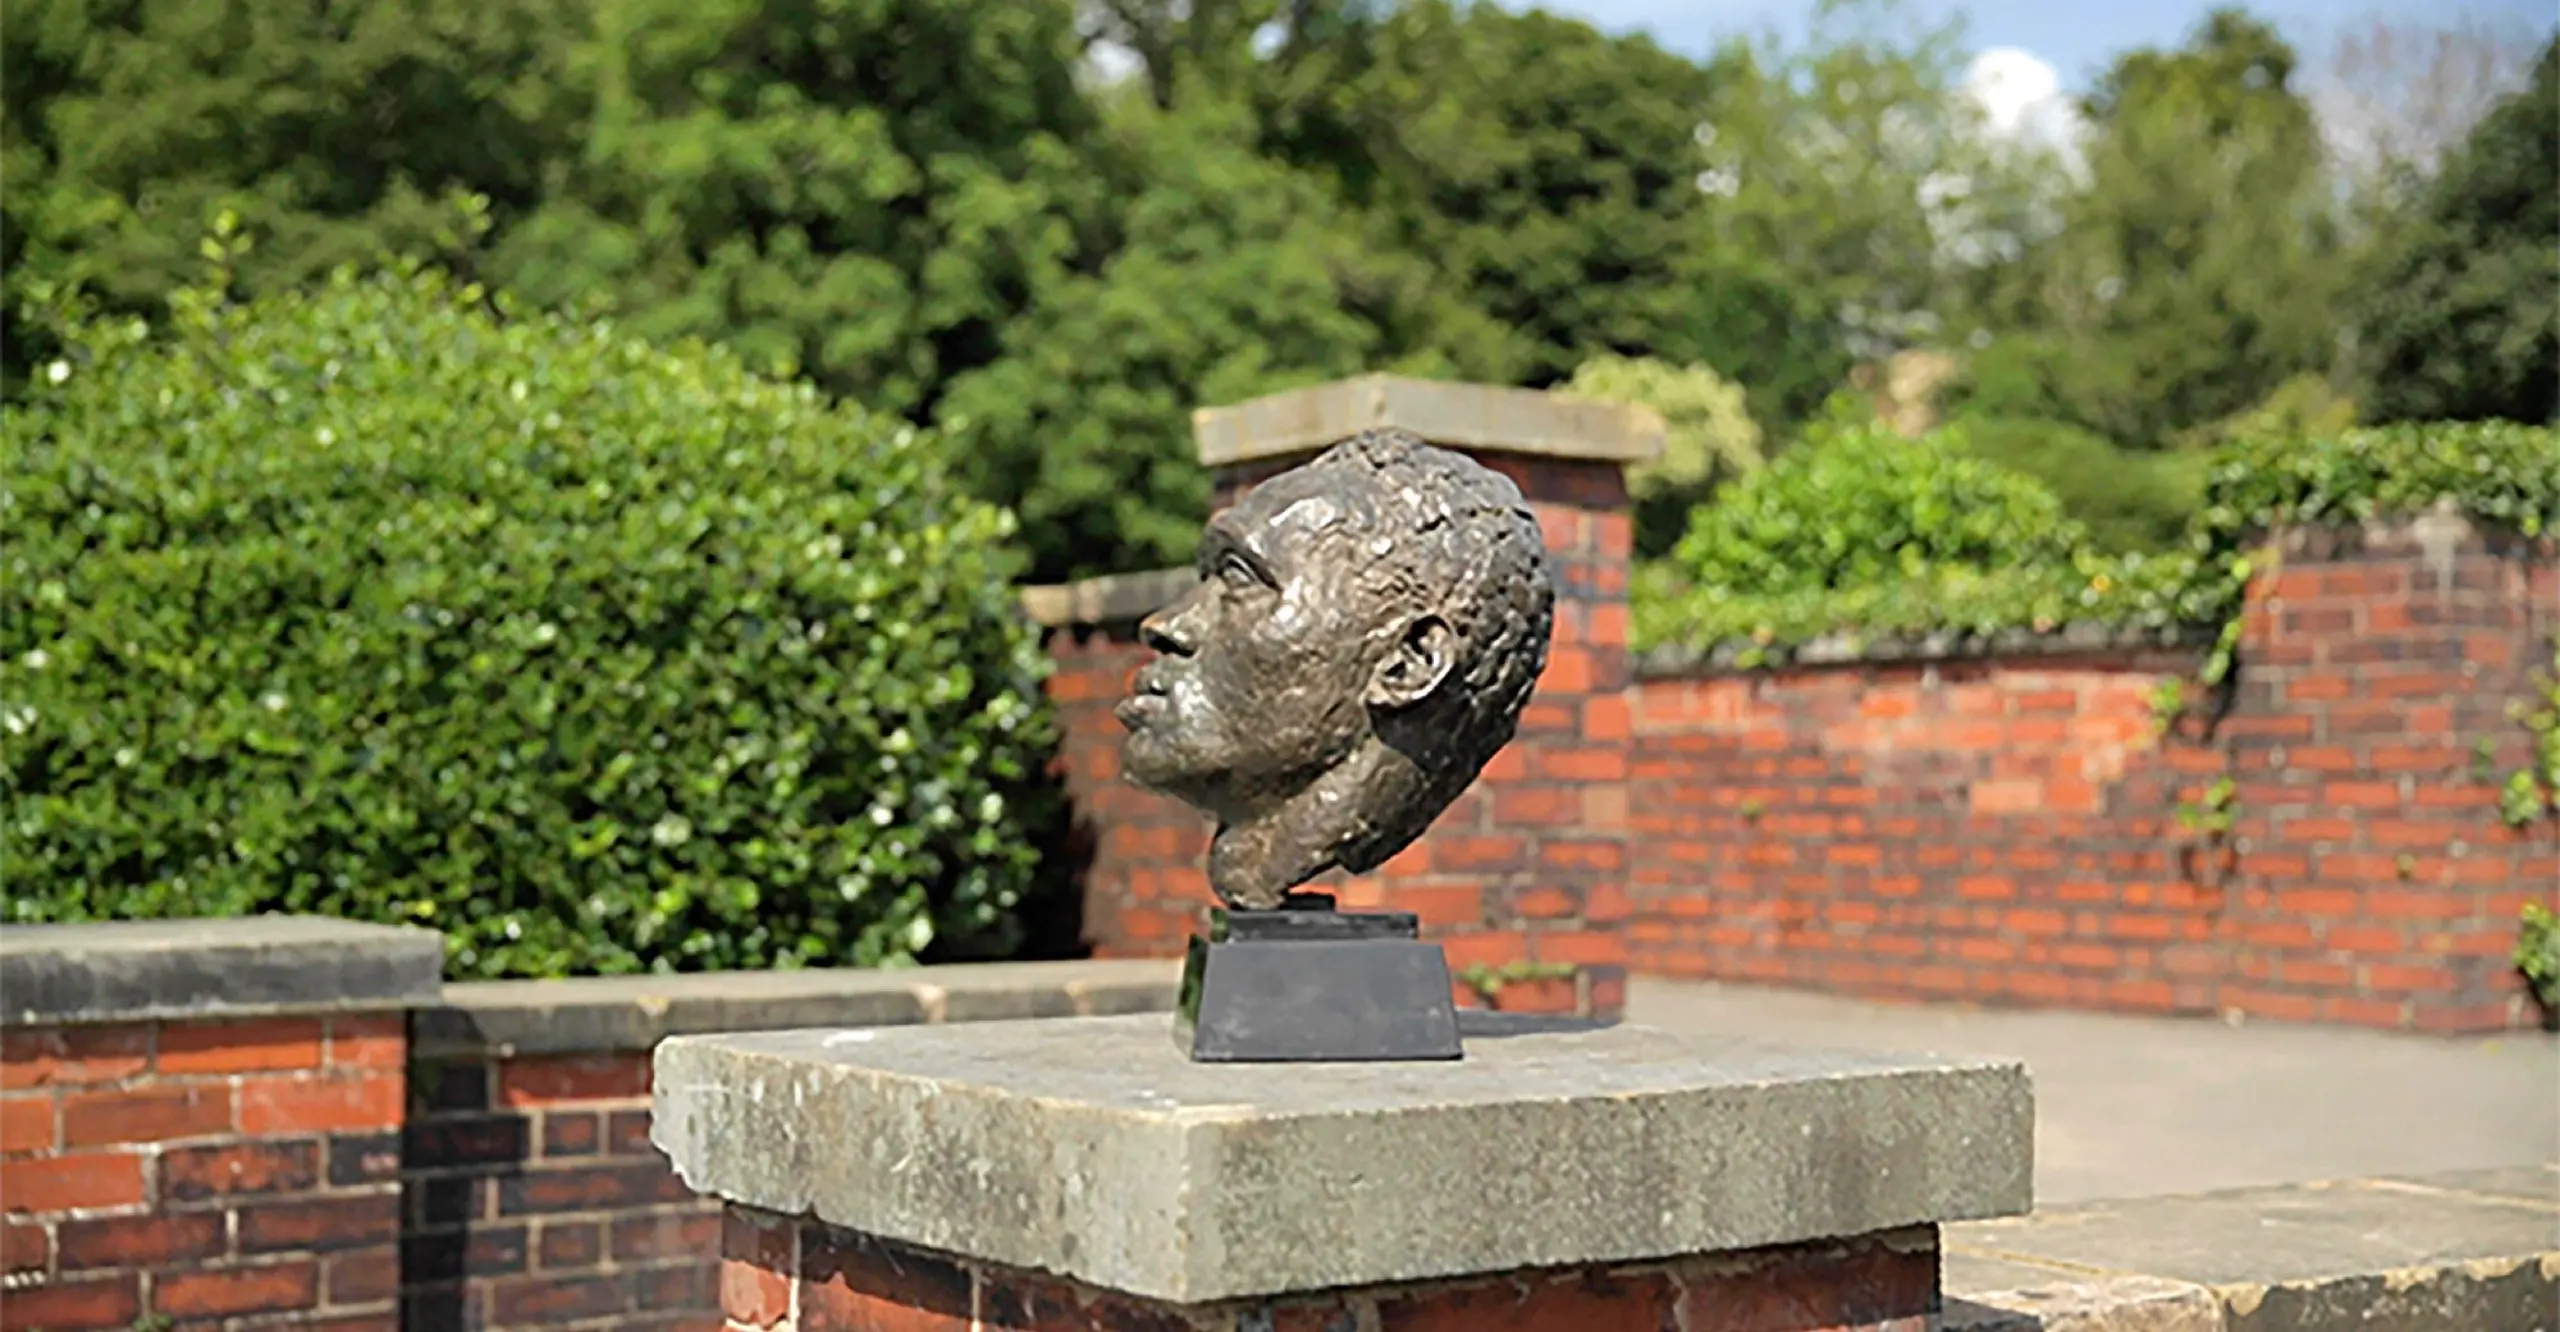 Colour photograph in landscape format featuring a bust of Paul Robeson on cement block outside